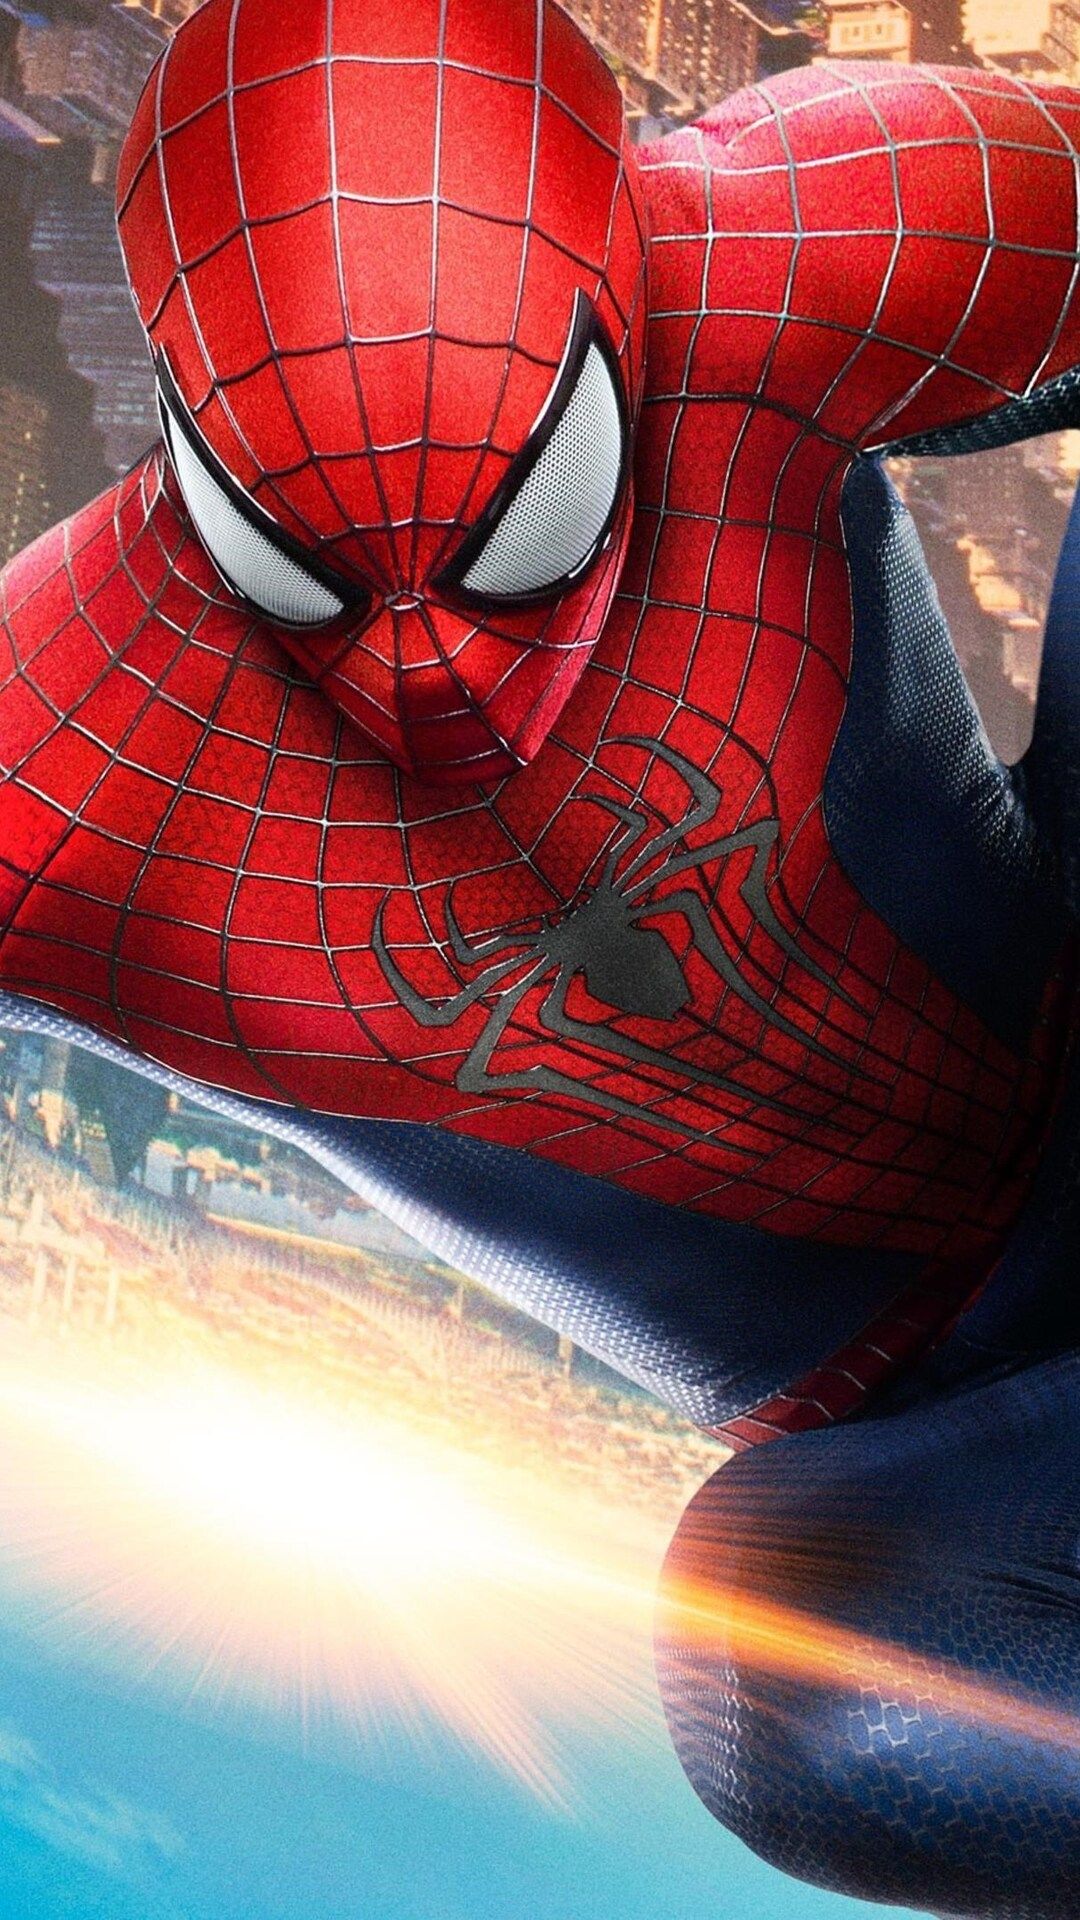 The Amazing Spider Man 2 iPhone 6s, 6 Plus, Pixel xl , One Plus 3t, 5 HD 4k Wallpaper, Image, Background, Photo and Picture